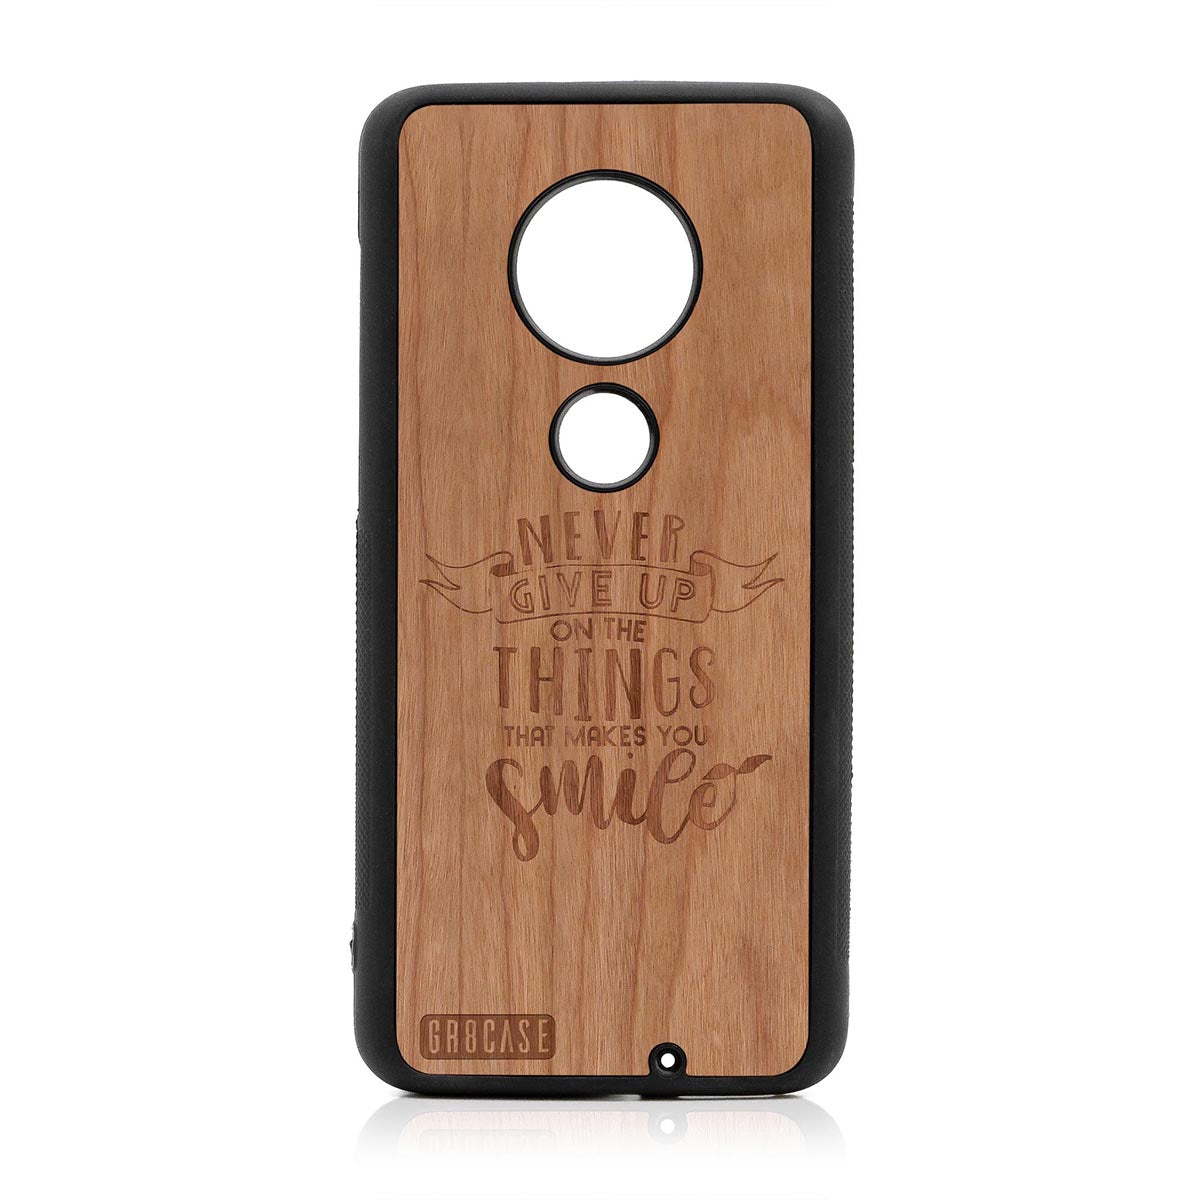 Never Give Up On The Things That Makes You Smile Design Wood Case Moto G7 Plus by GR8CASE